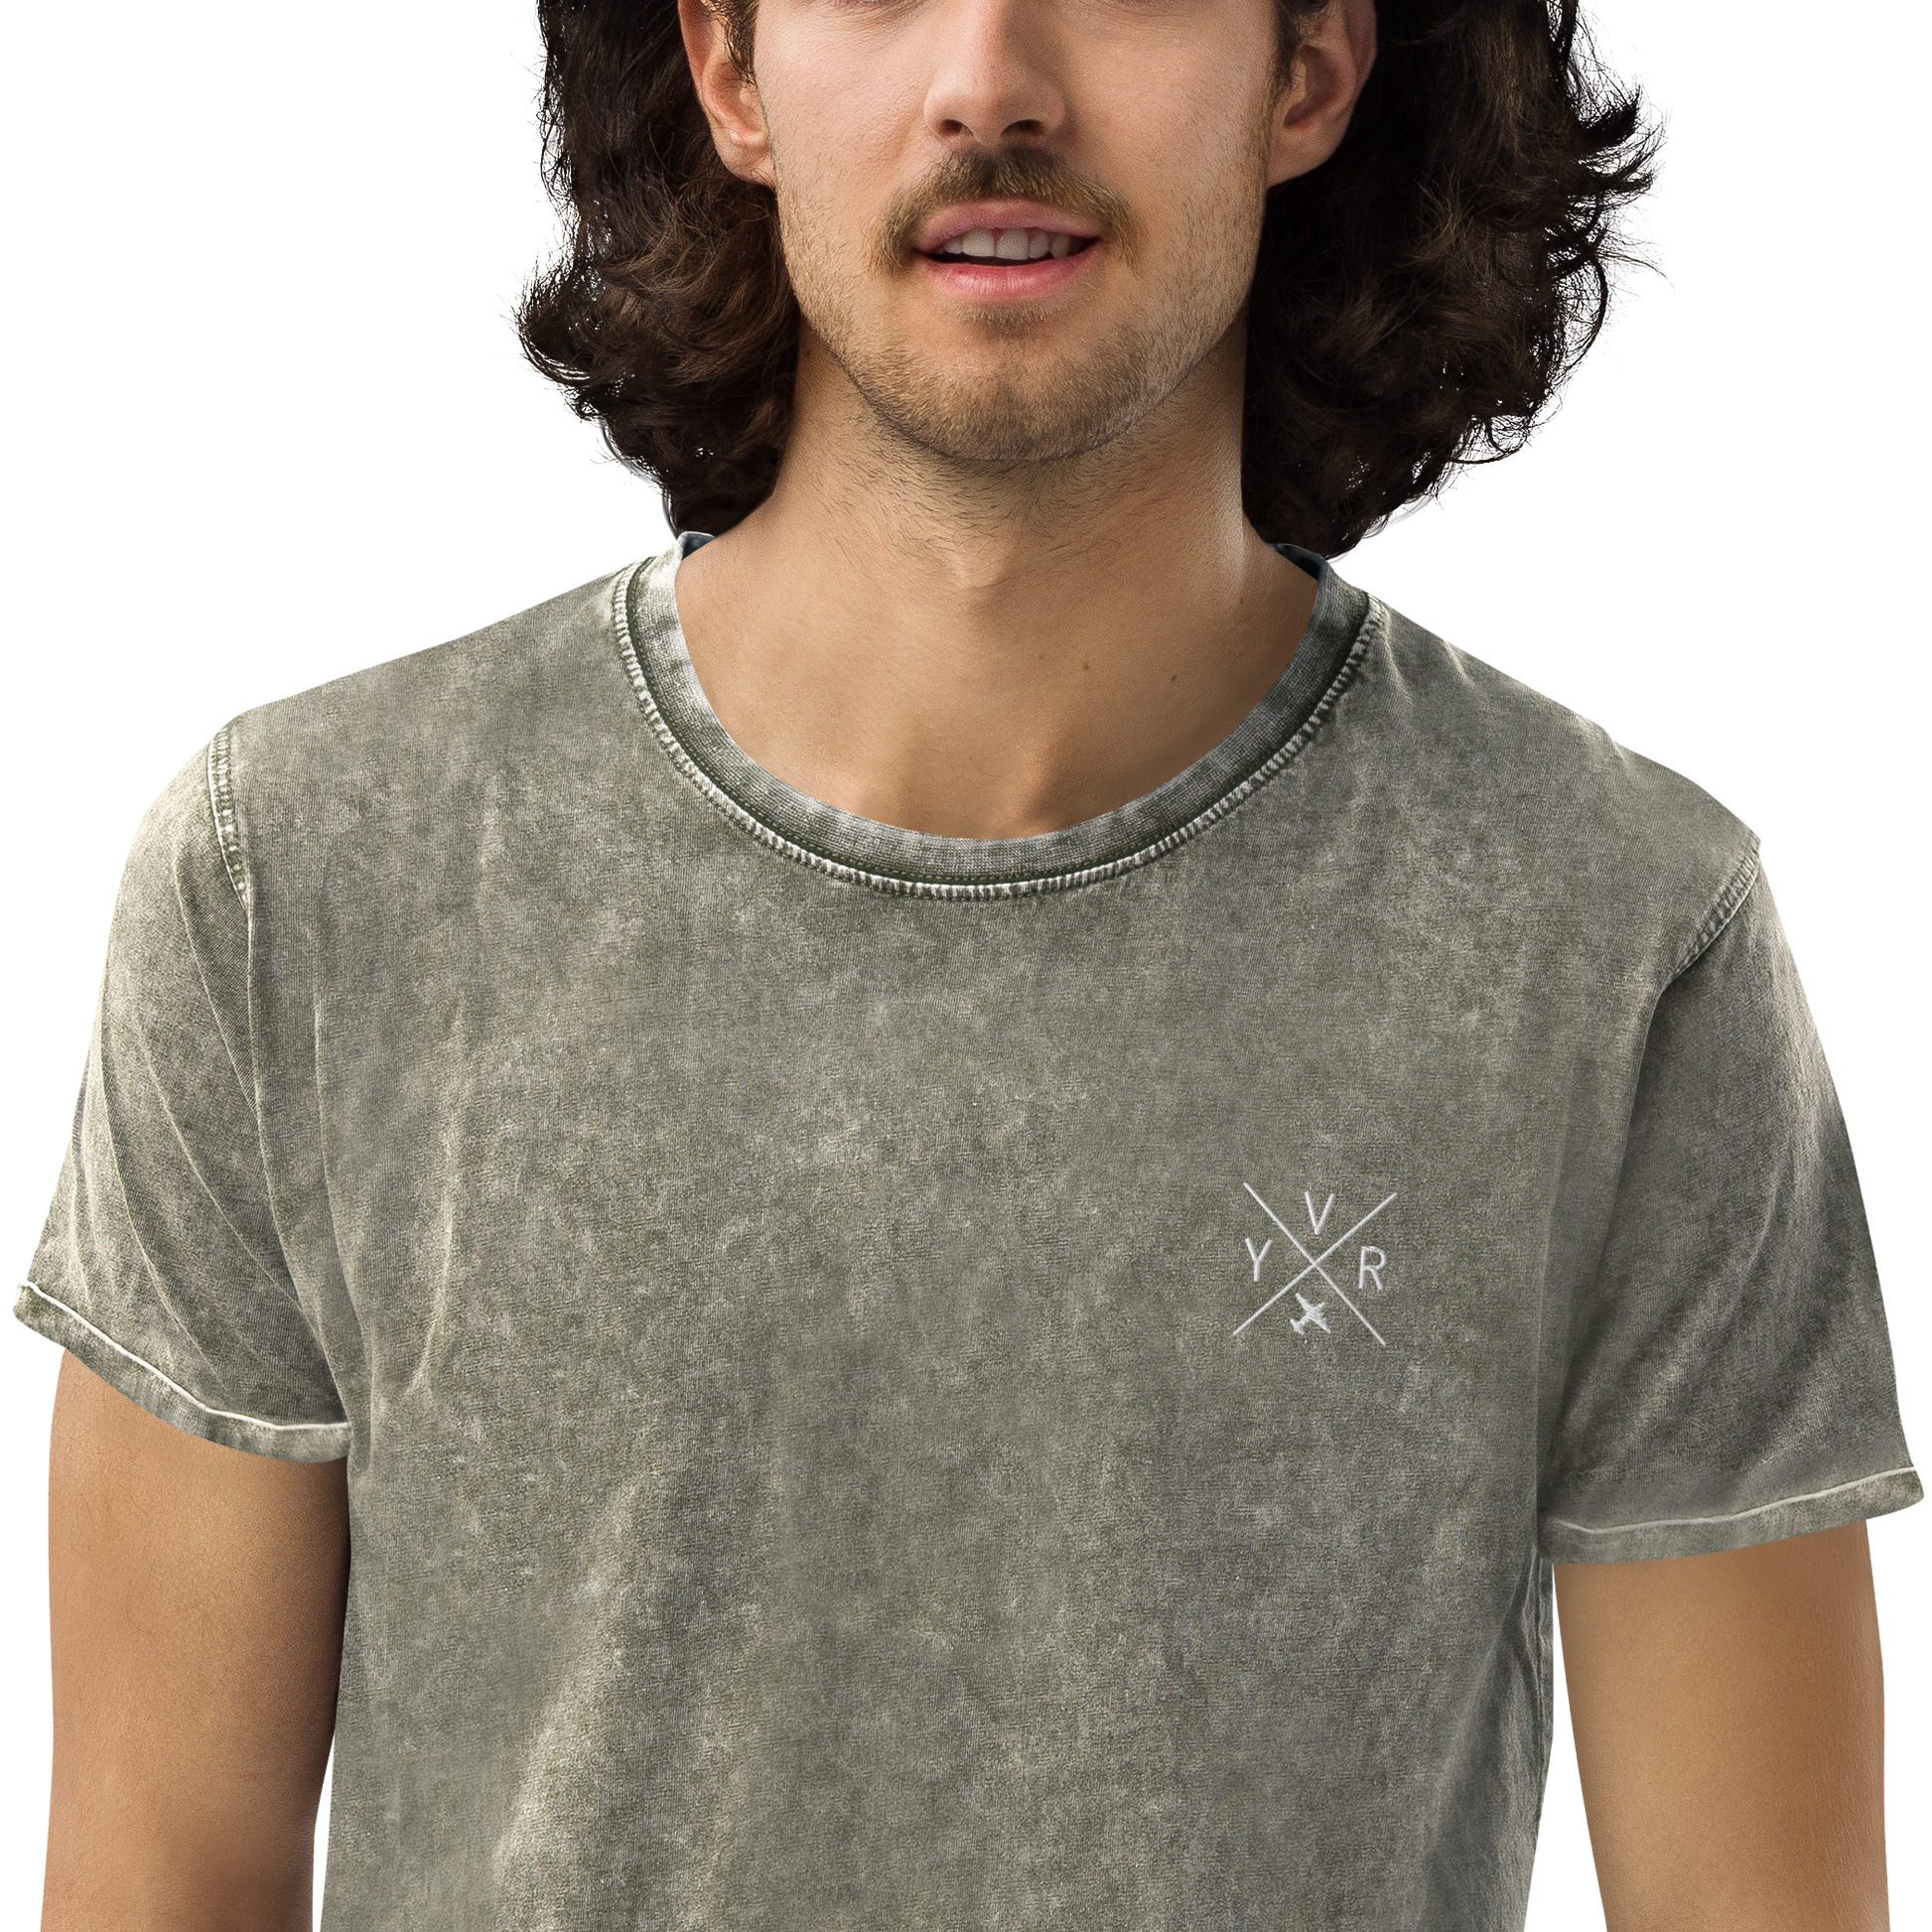 YHM Designs - YVR Vancouver Denim T-Shirt - Crossed-X Design with Airport Code and Vintage Propliner - White Embroidery - Image 11